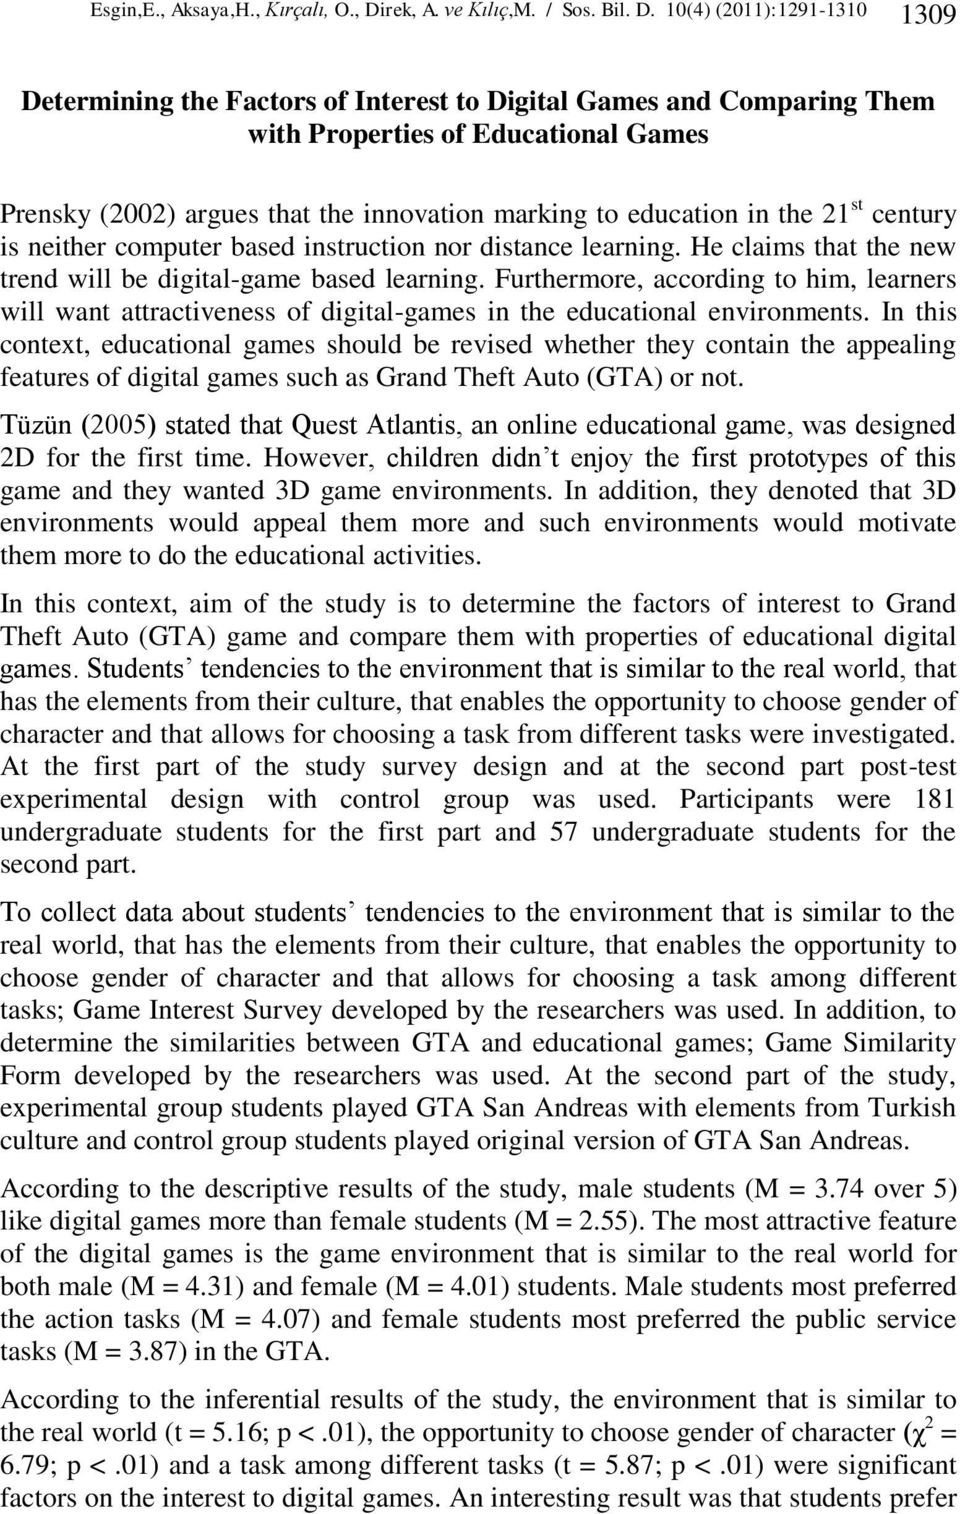 10(4) (2011):1291-1310 1309 Determining the Factors of Interest to Digital Games and Comparing Them with Properties of Educational Games Prensky (2002) argues that the innovation marking to education